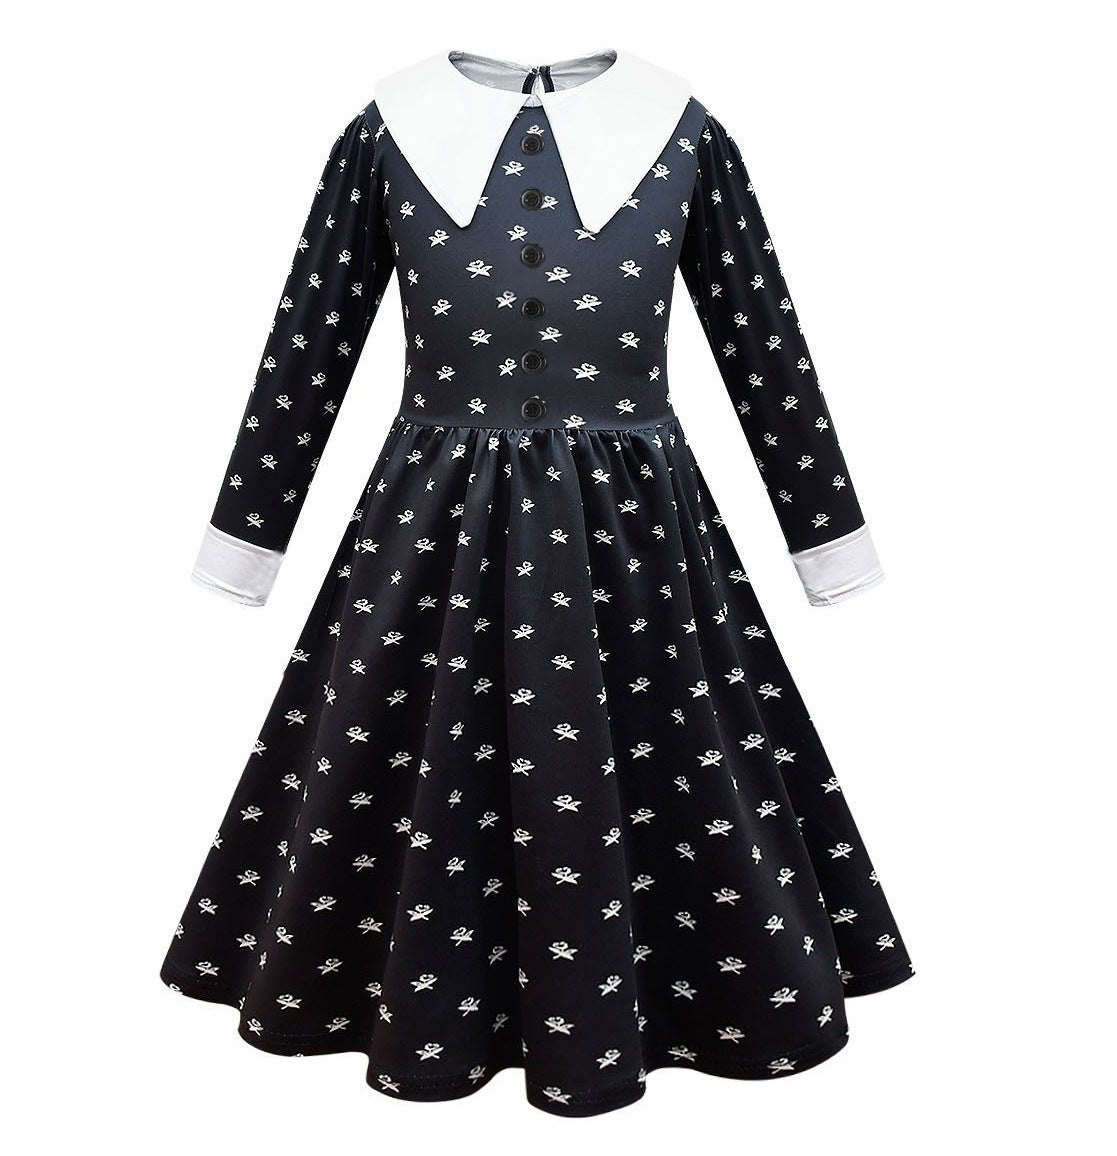 Wednesday Addams Costume Long Sleeves One Piece Dress Collar Ideal Present